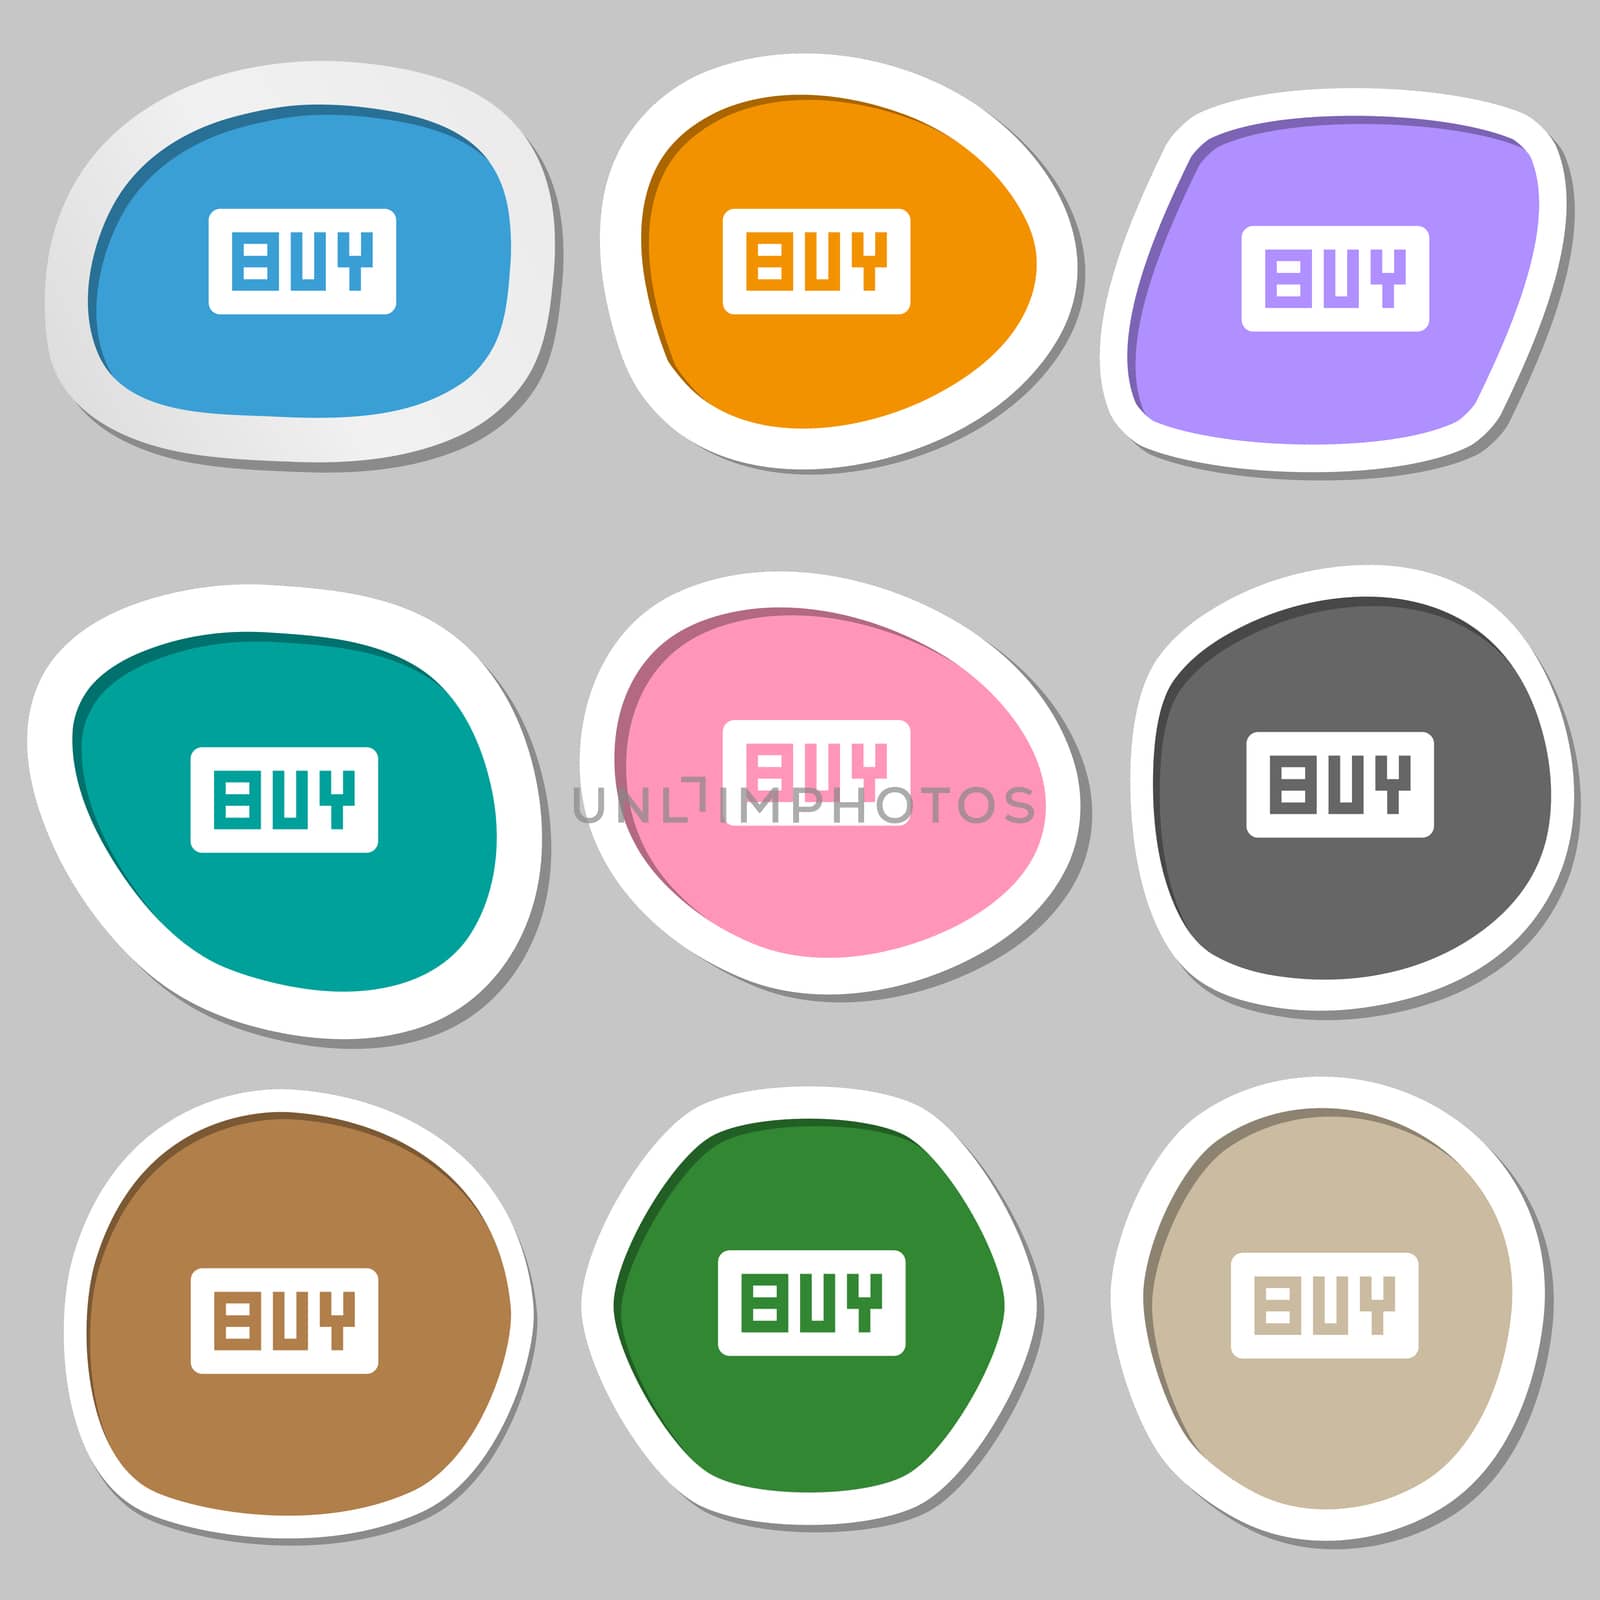 Buy, Online buying dollar usd  icon symbols. Multicolored paper stickers. illustration